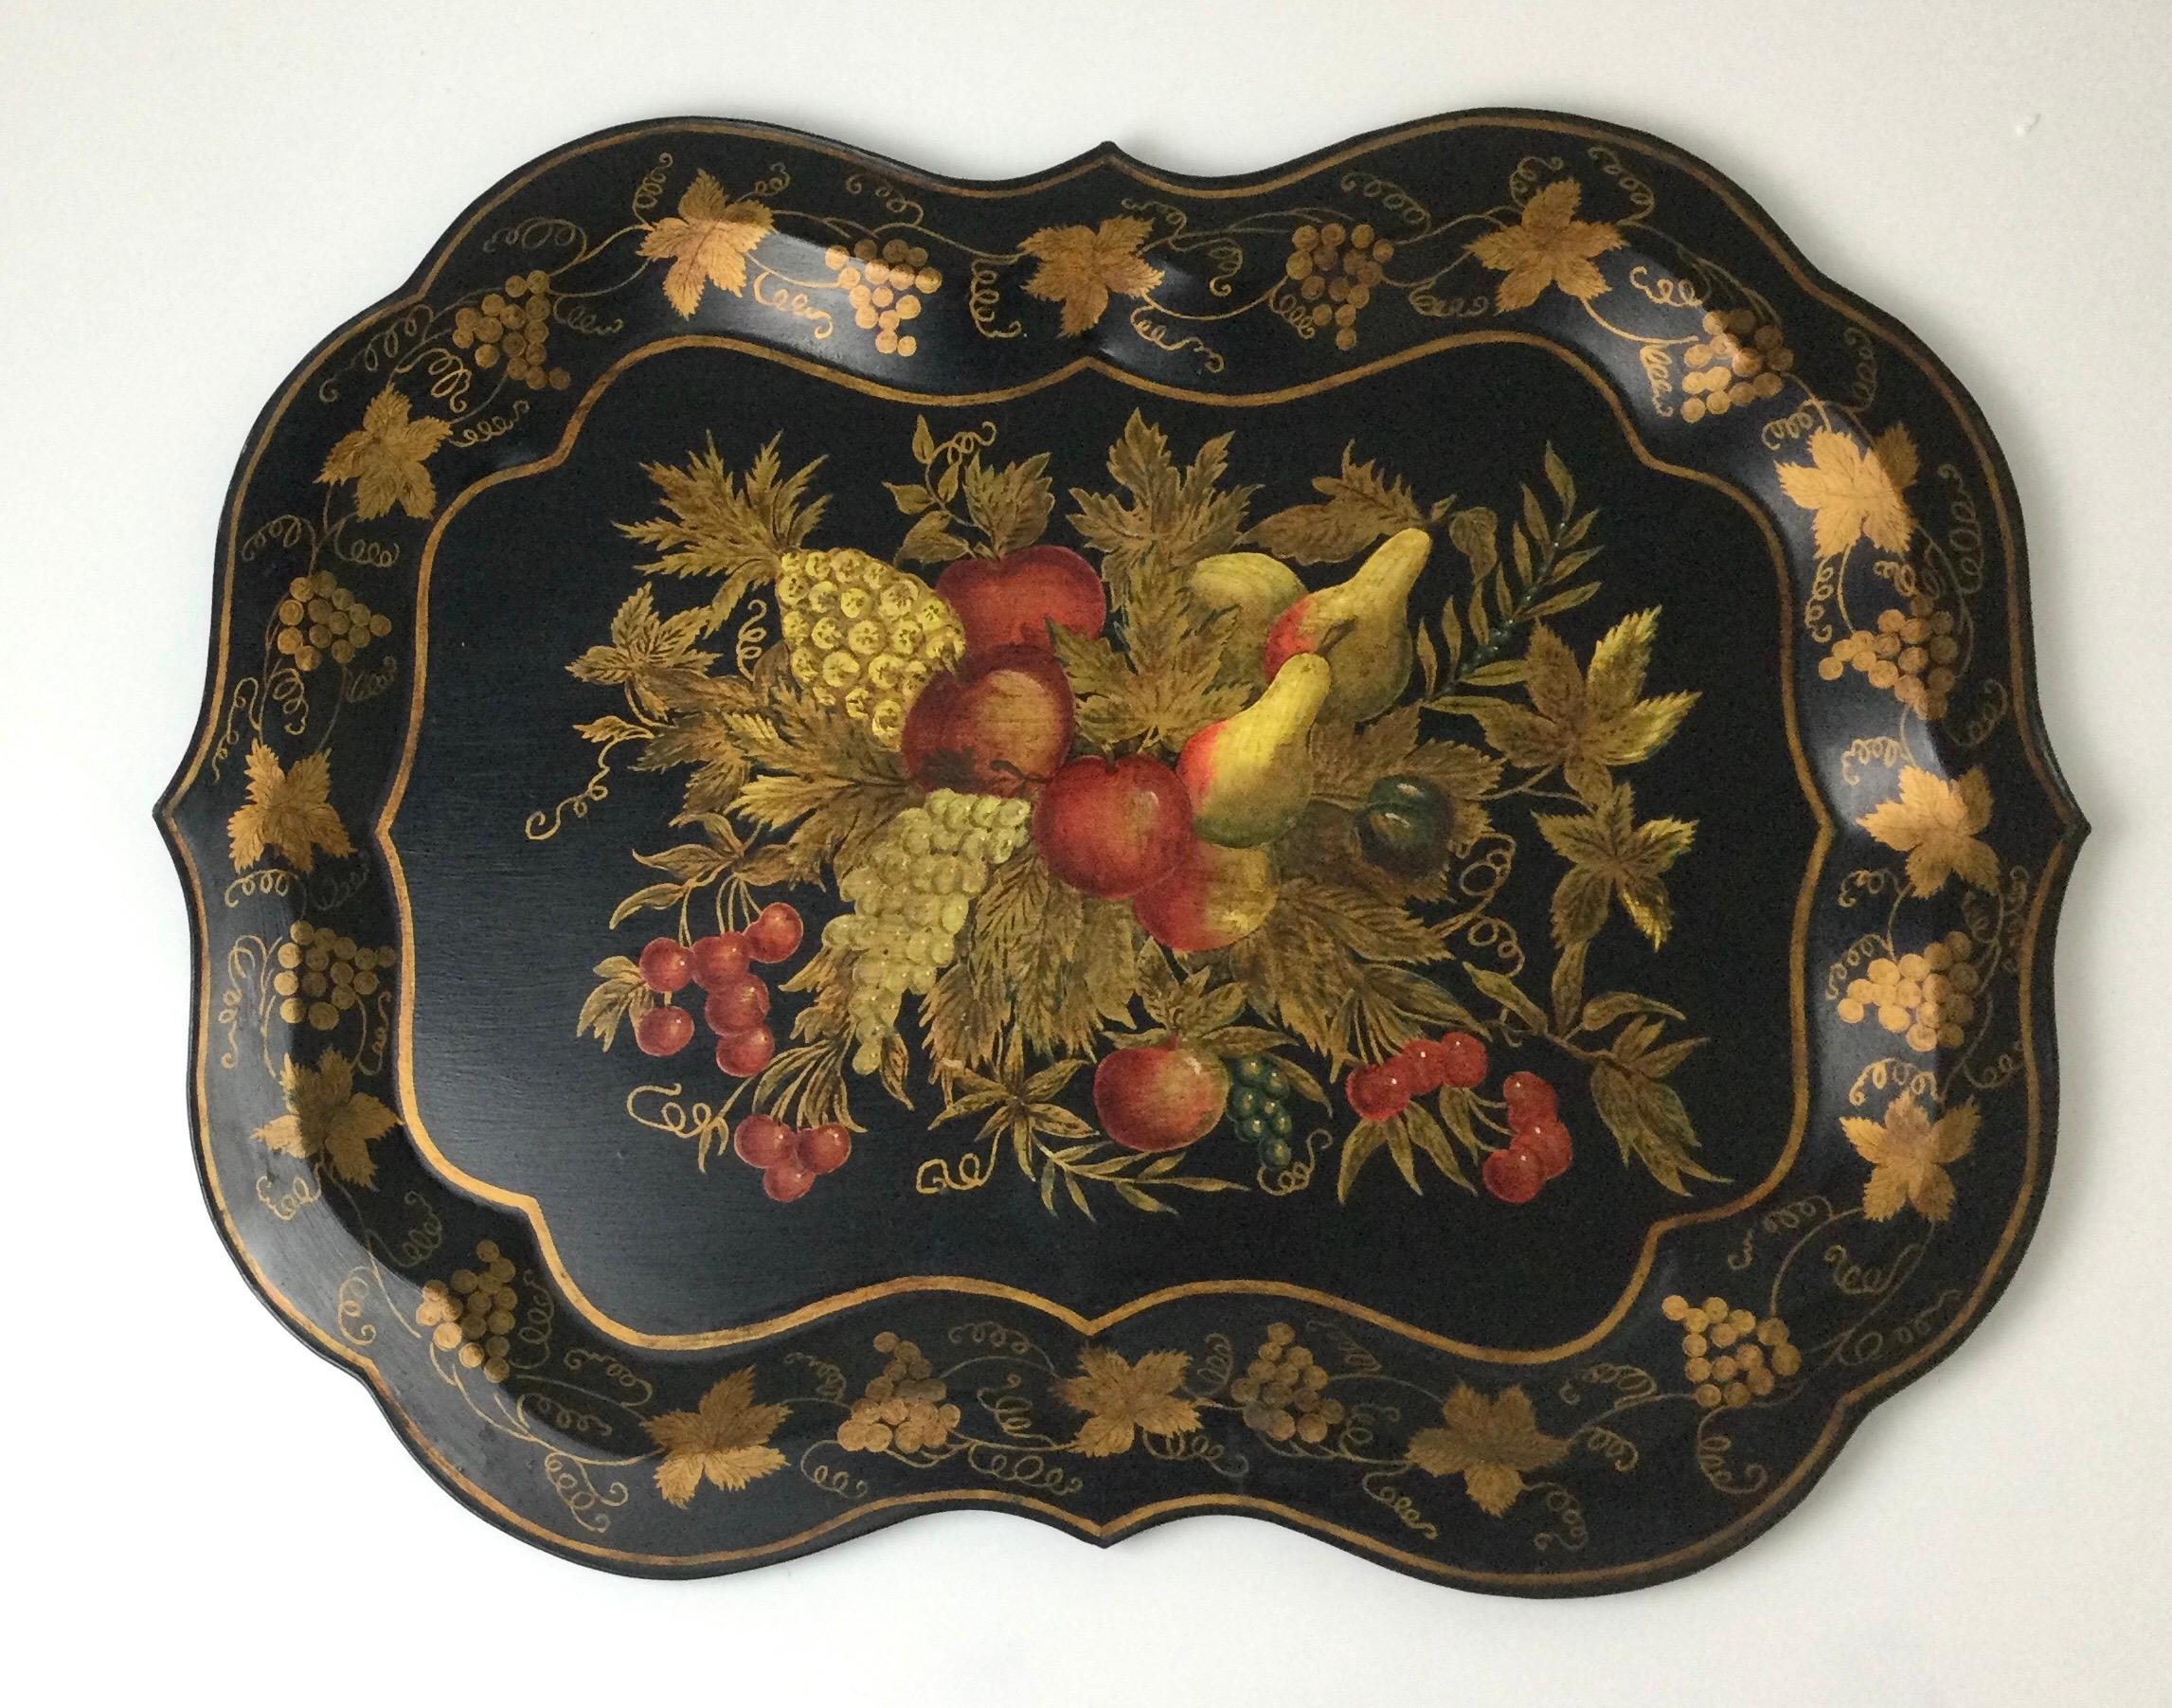 Wonderful hand painted English Late 19th c. tole tray. You can see the brush stocked on the tin tray. Very minor age appropriate ware. Nice large size 24 by 19